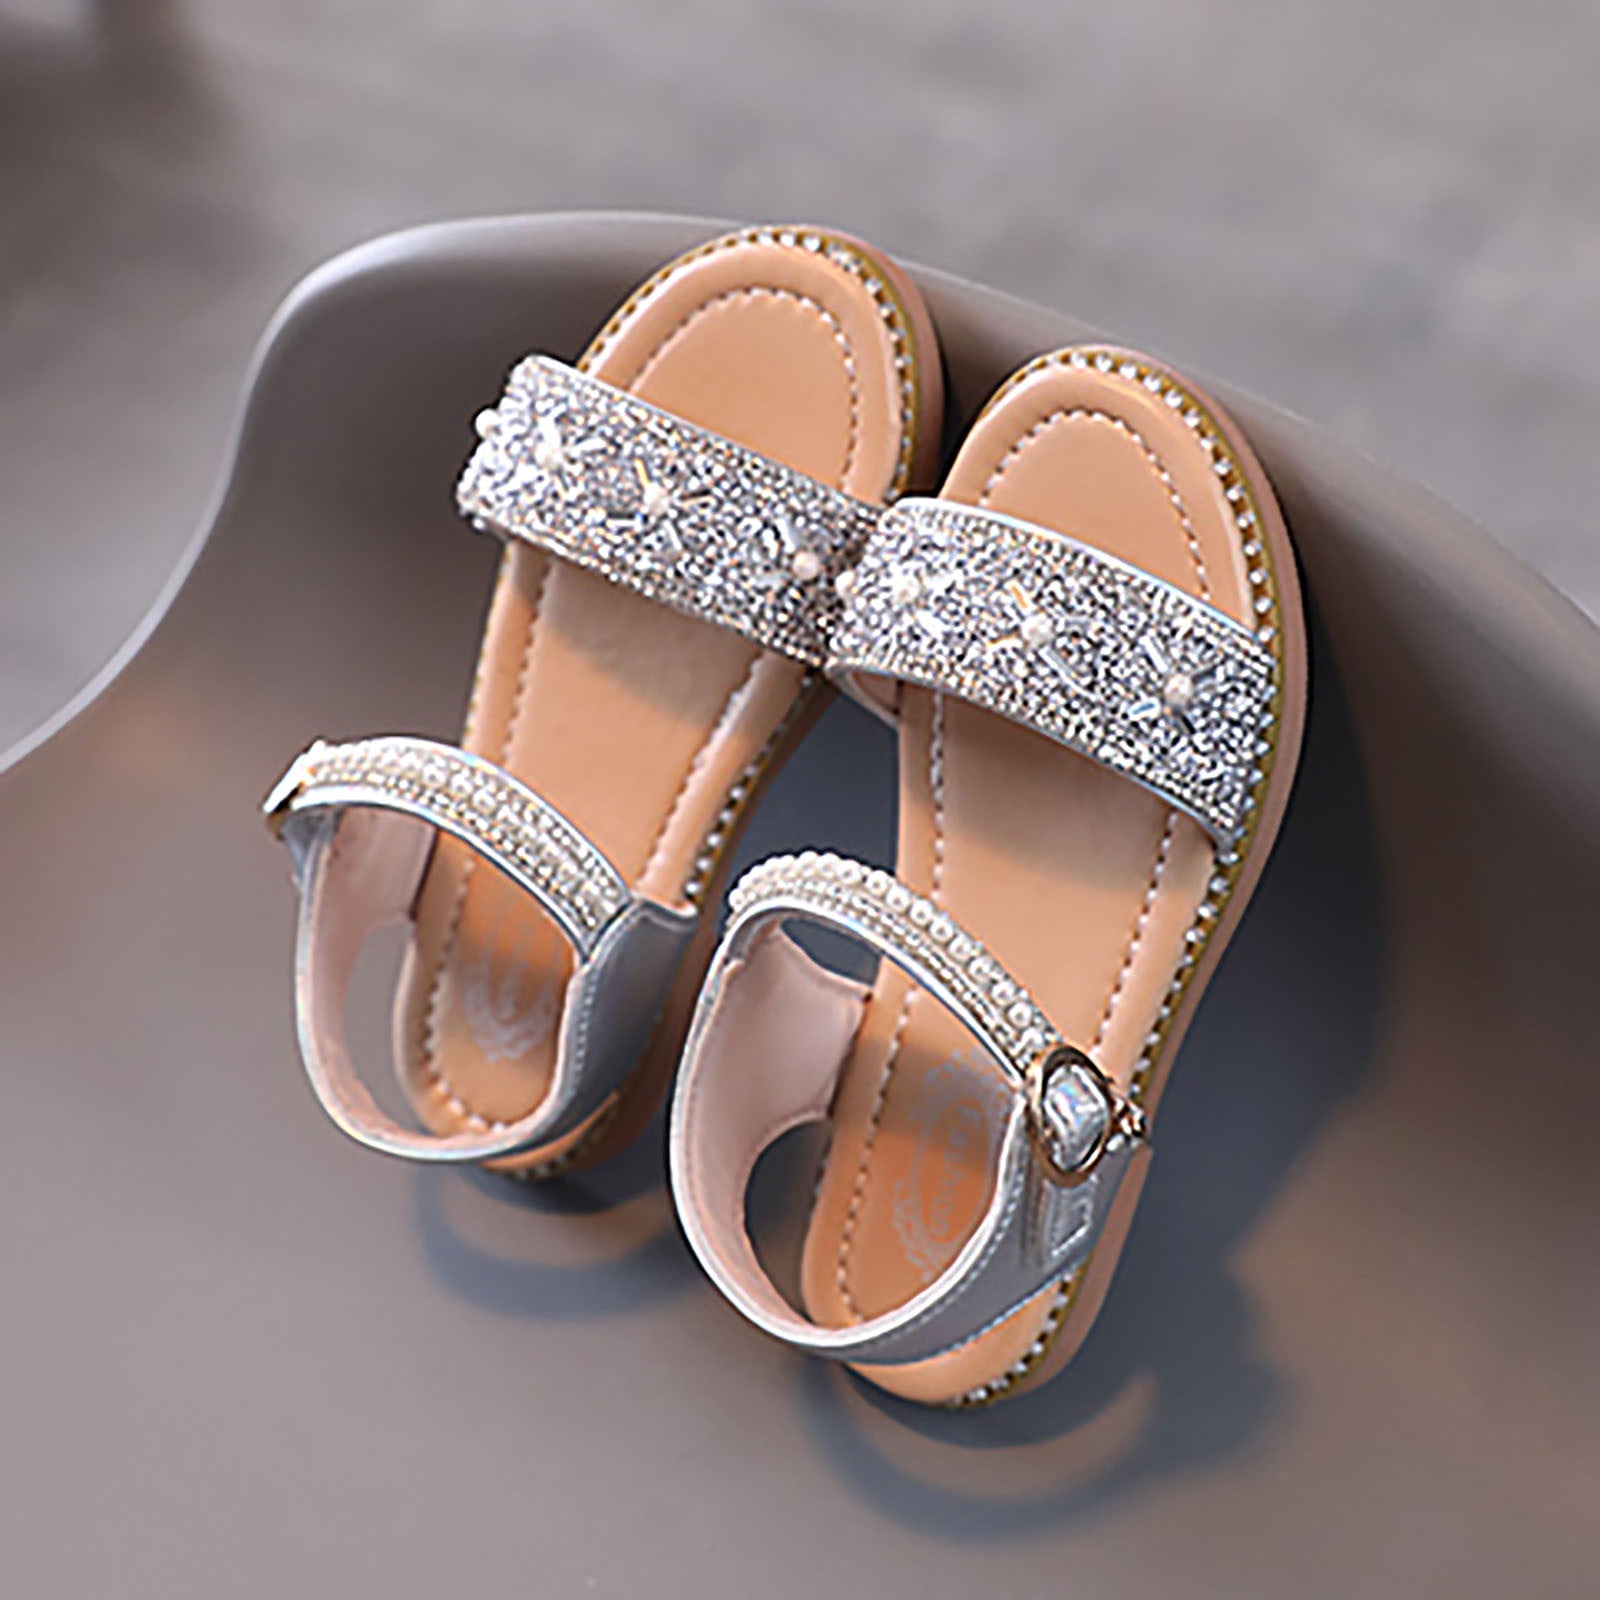 41 Bridesmaid Shoes You'll Actually Love Wearing (and Rewearing)